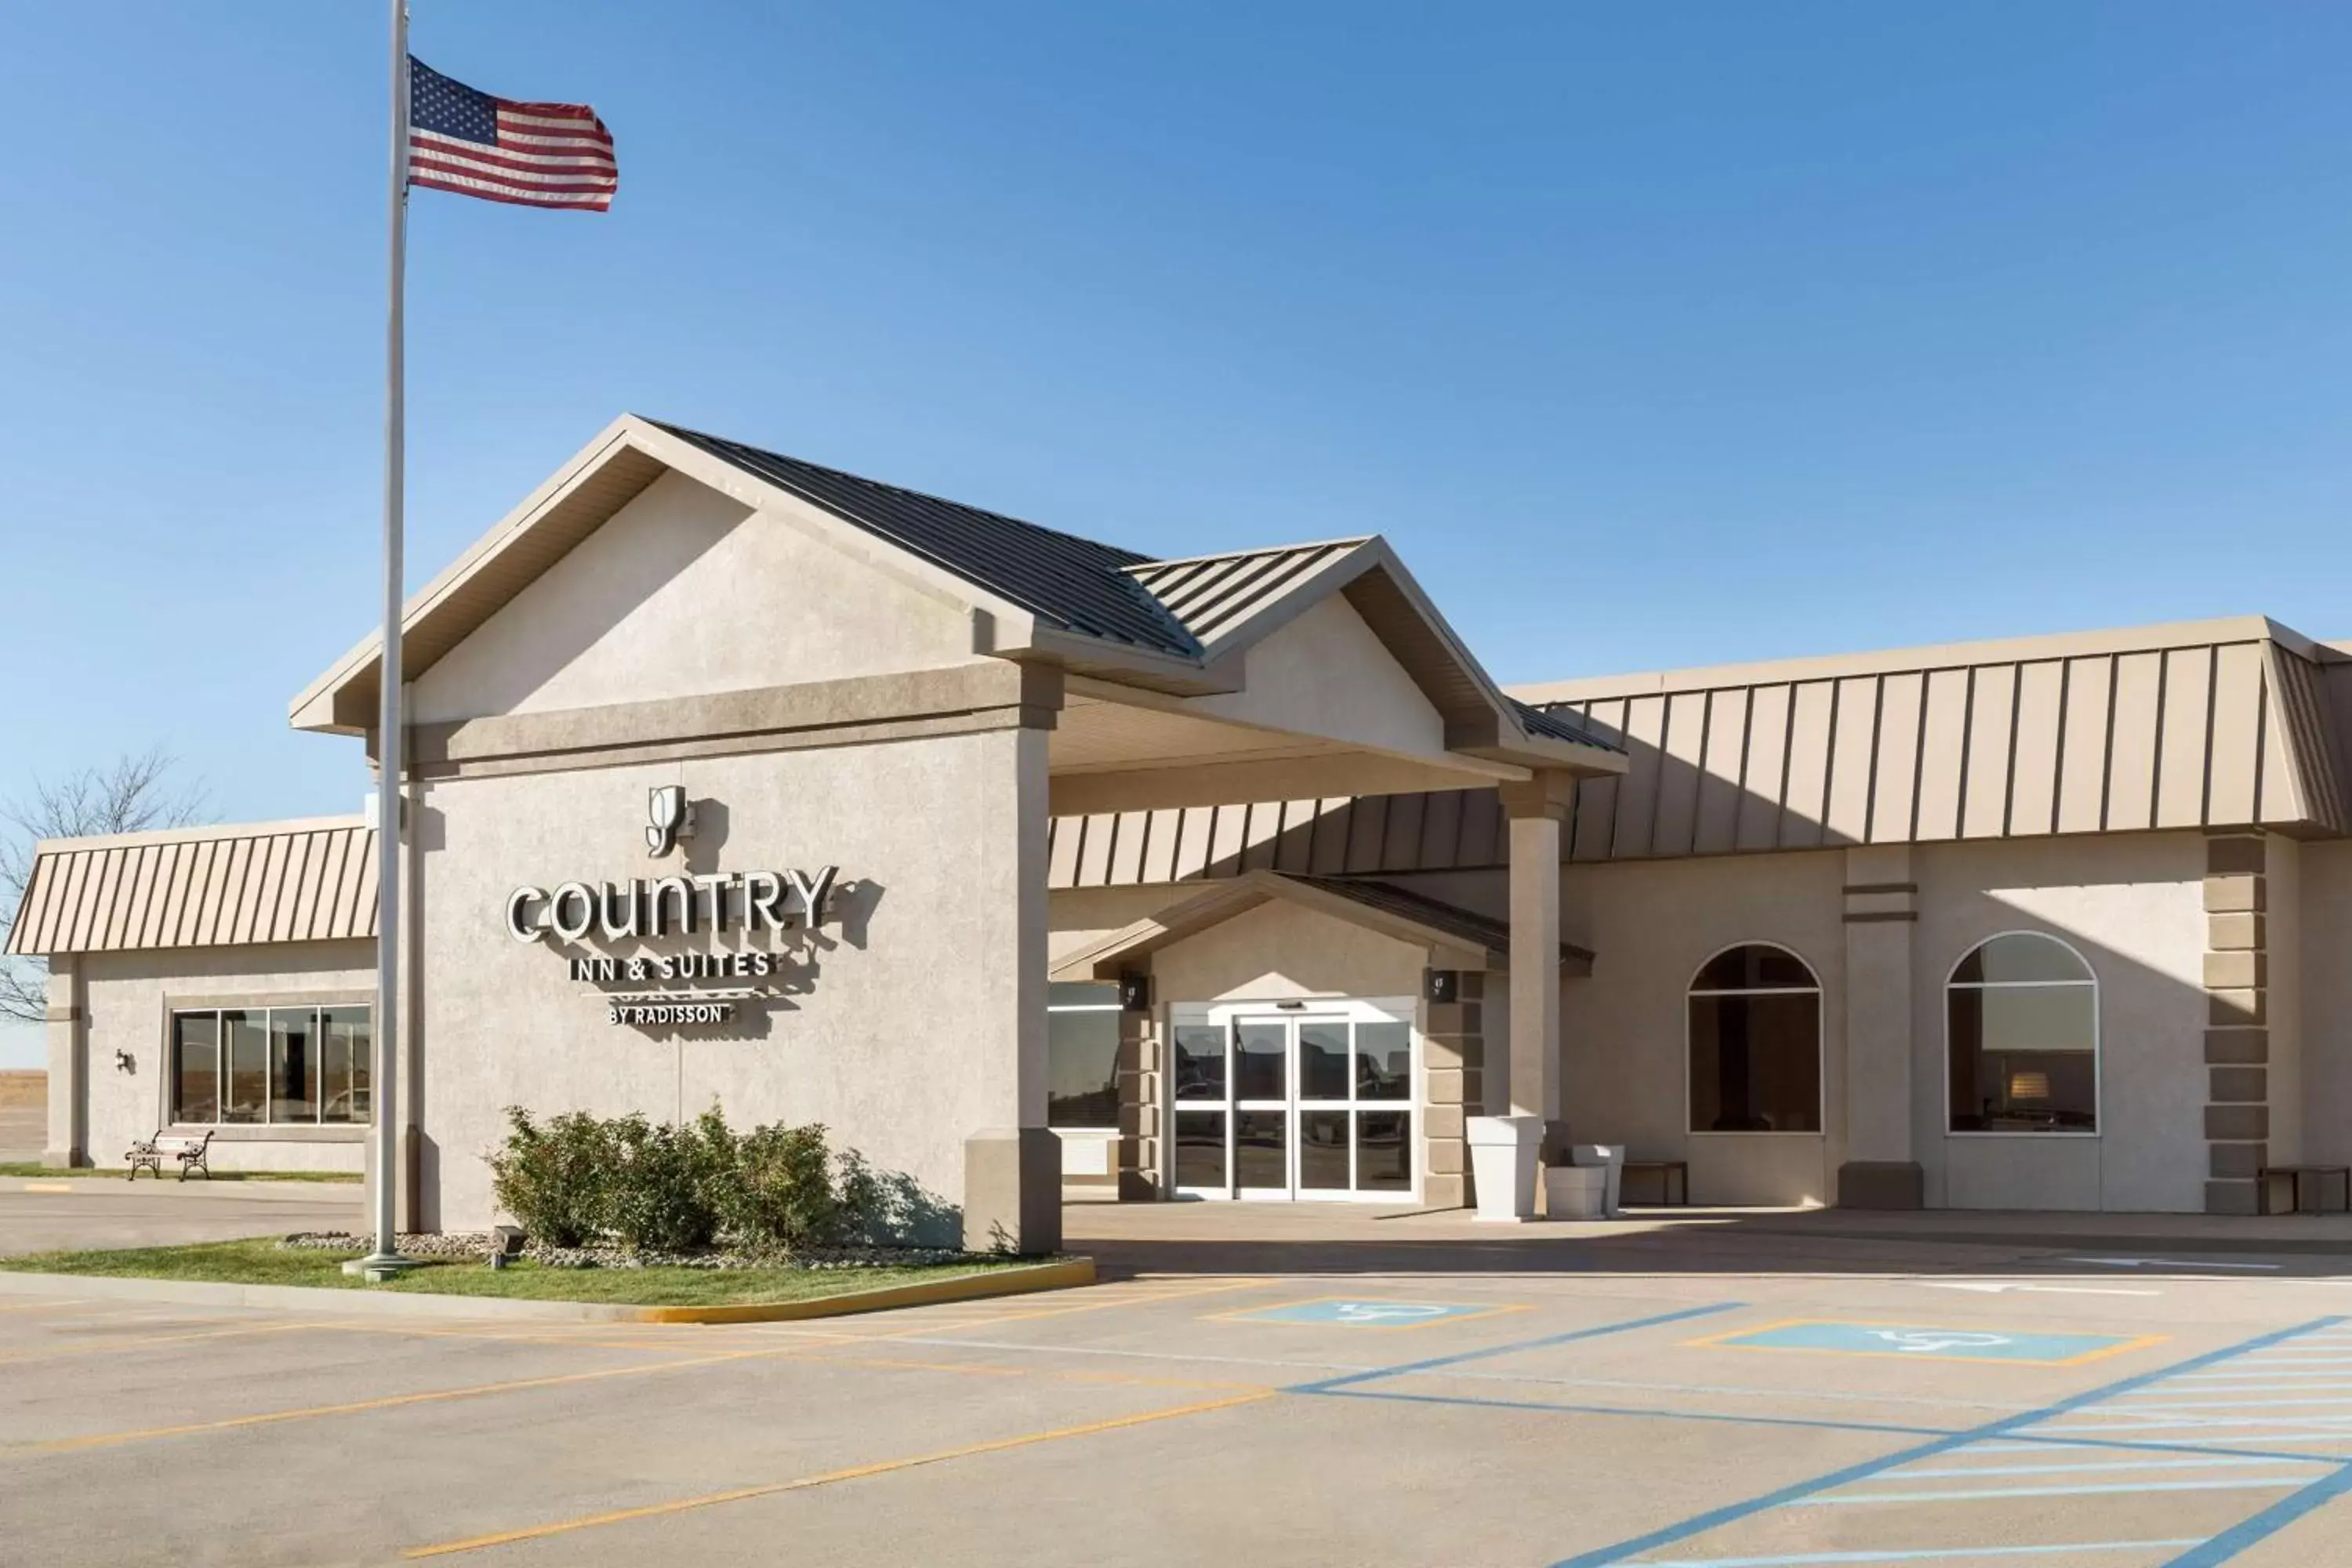 Property building in Country Inn & Suites by Radisson, Sidney, NE